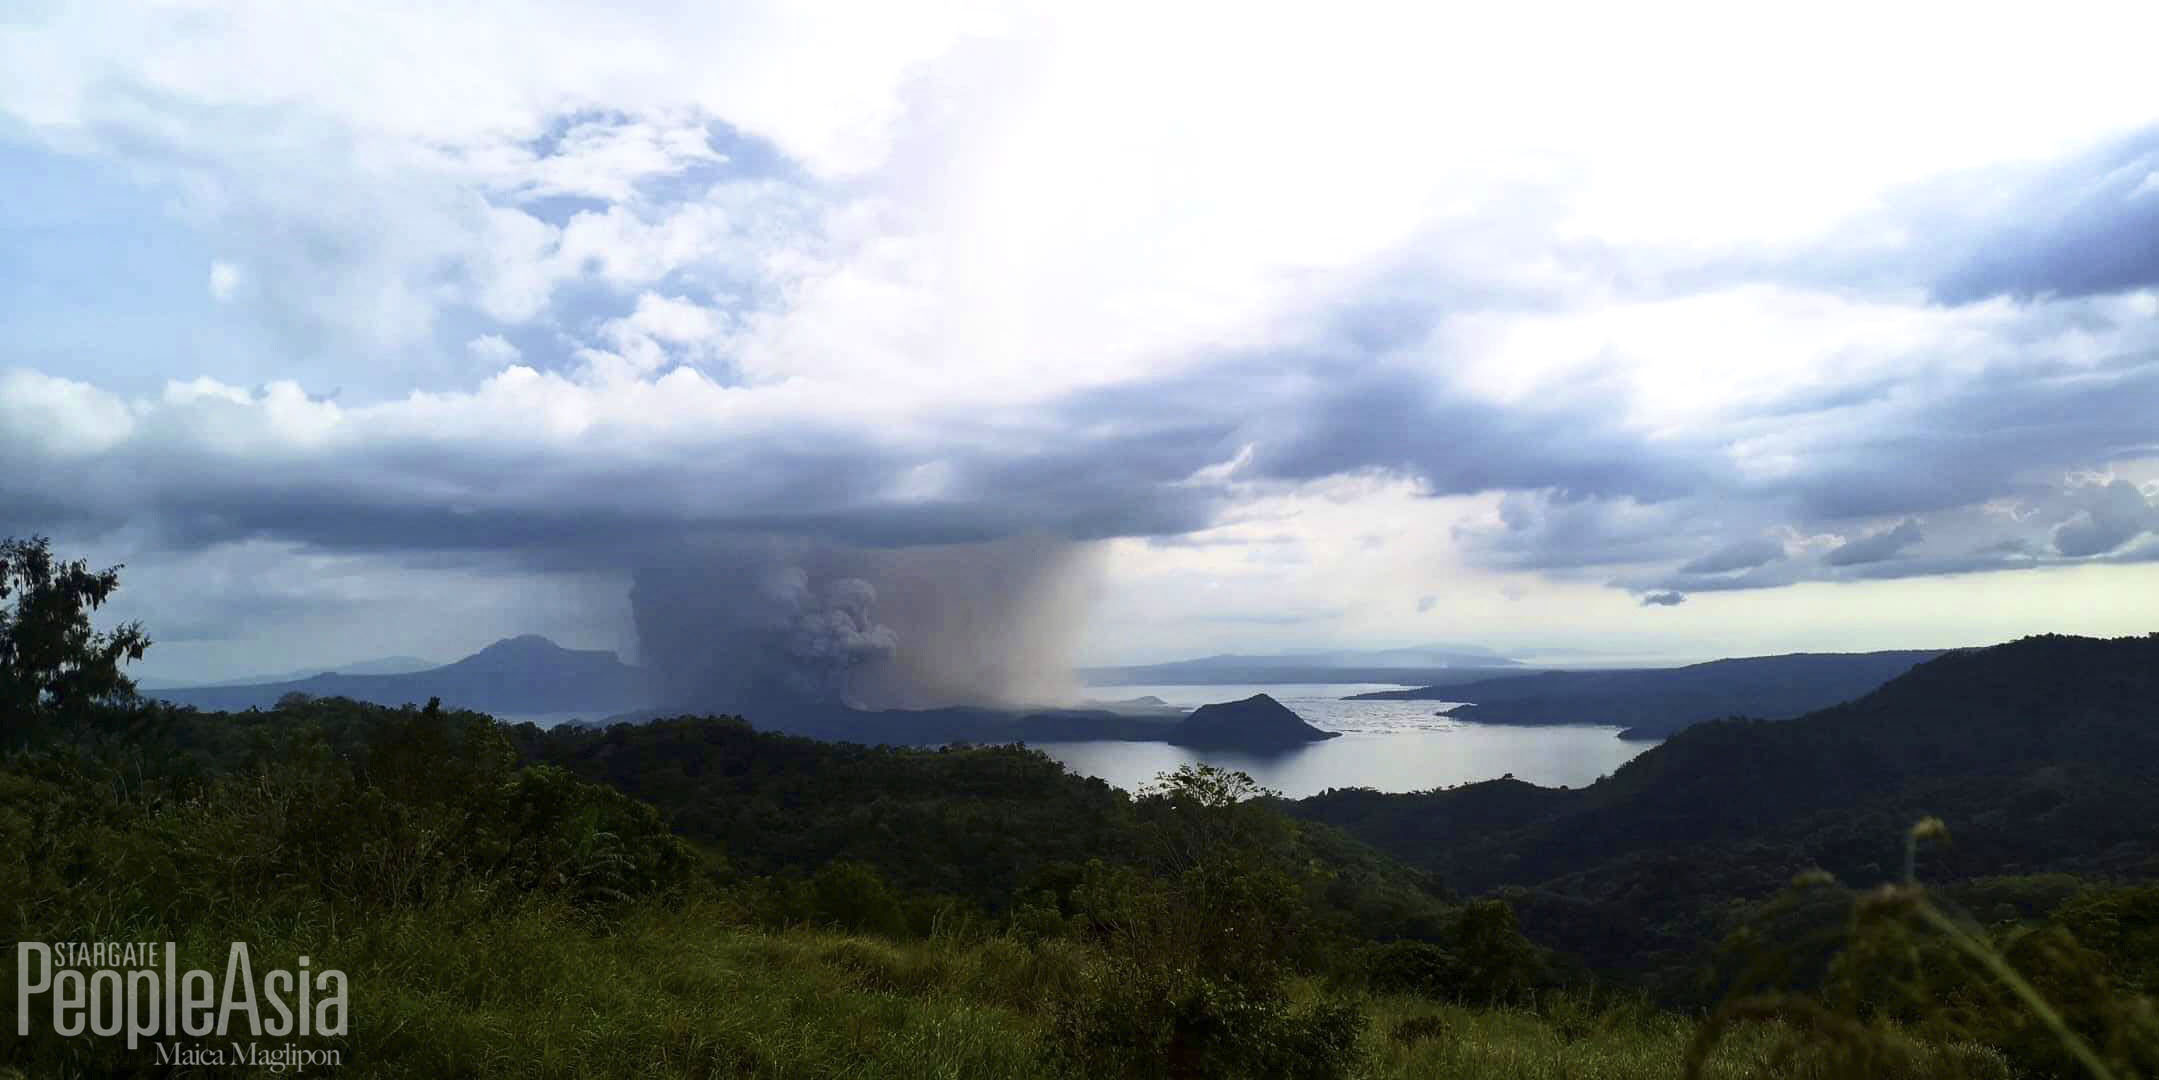 Millennial vs. ‘Boomer’: A firsthand account of the Taal Volcano eruption